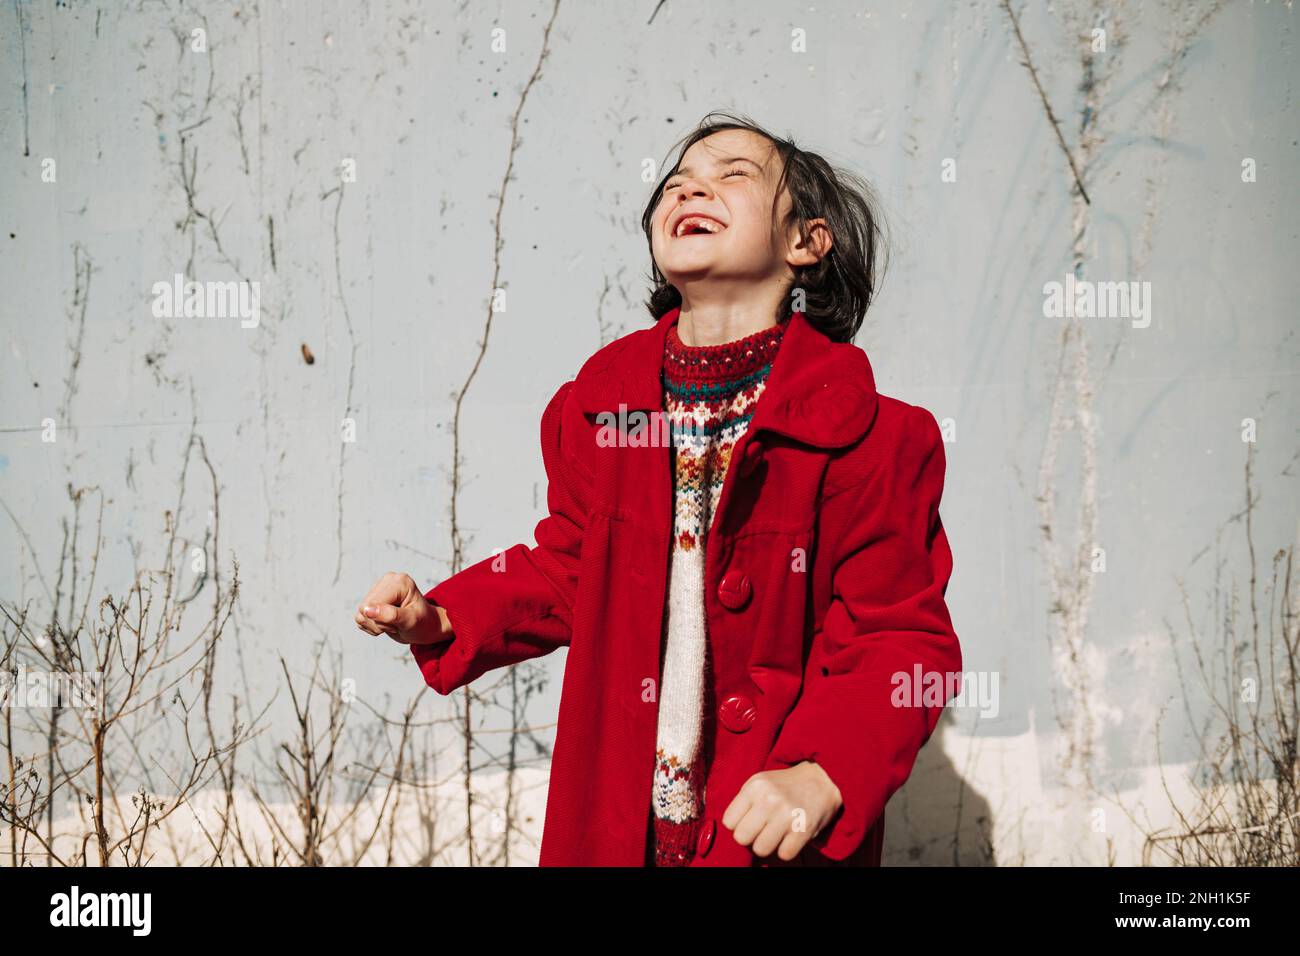 girl in red coat laughing in front of cement wall with vines Stock Photo